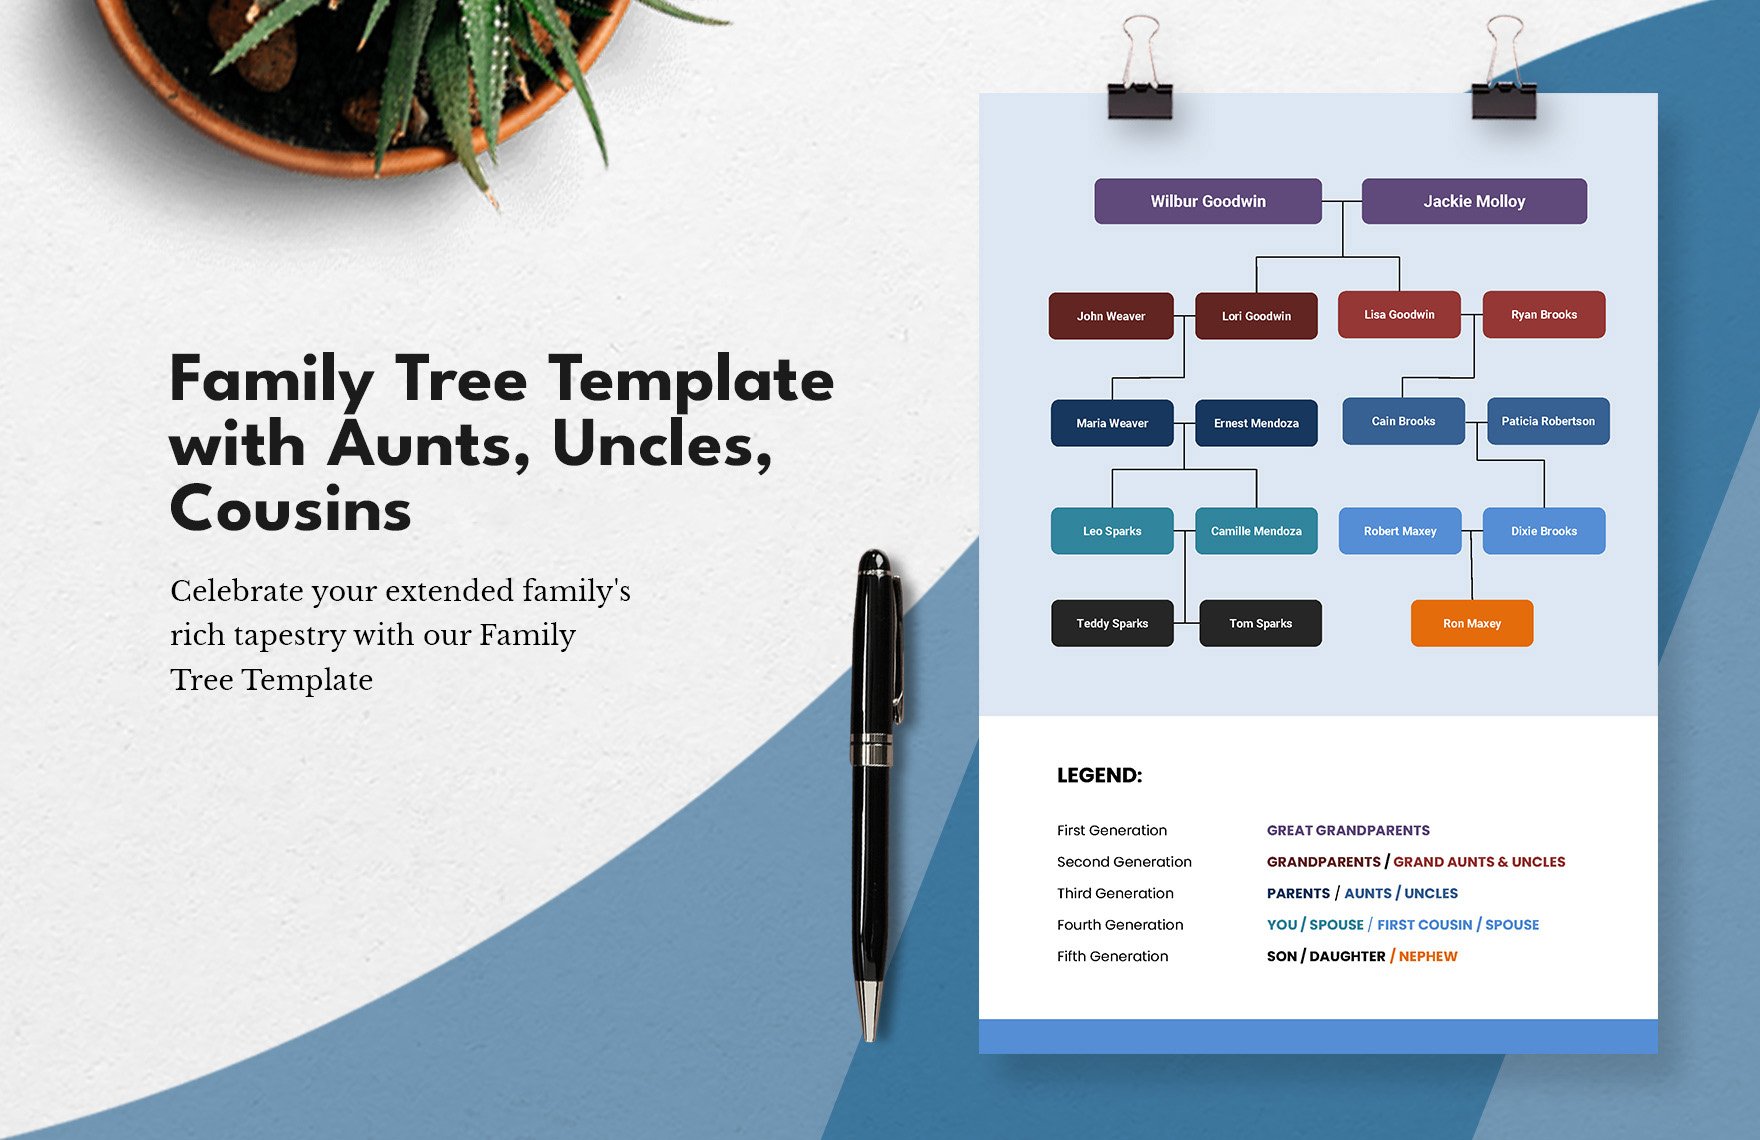 Family Tree Template with Aunts, Uncles, Cousins